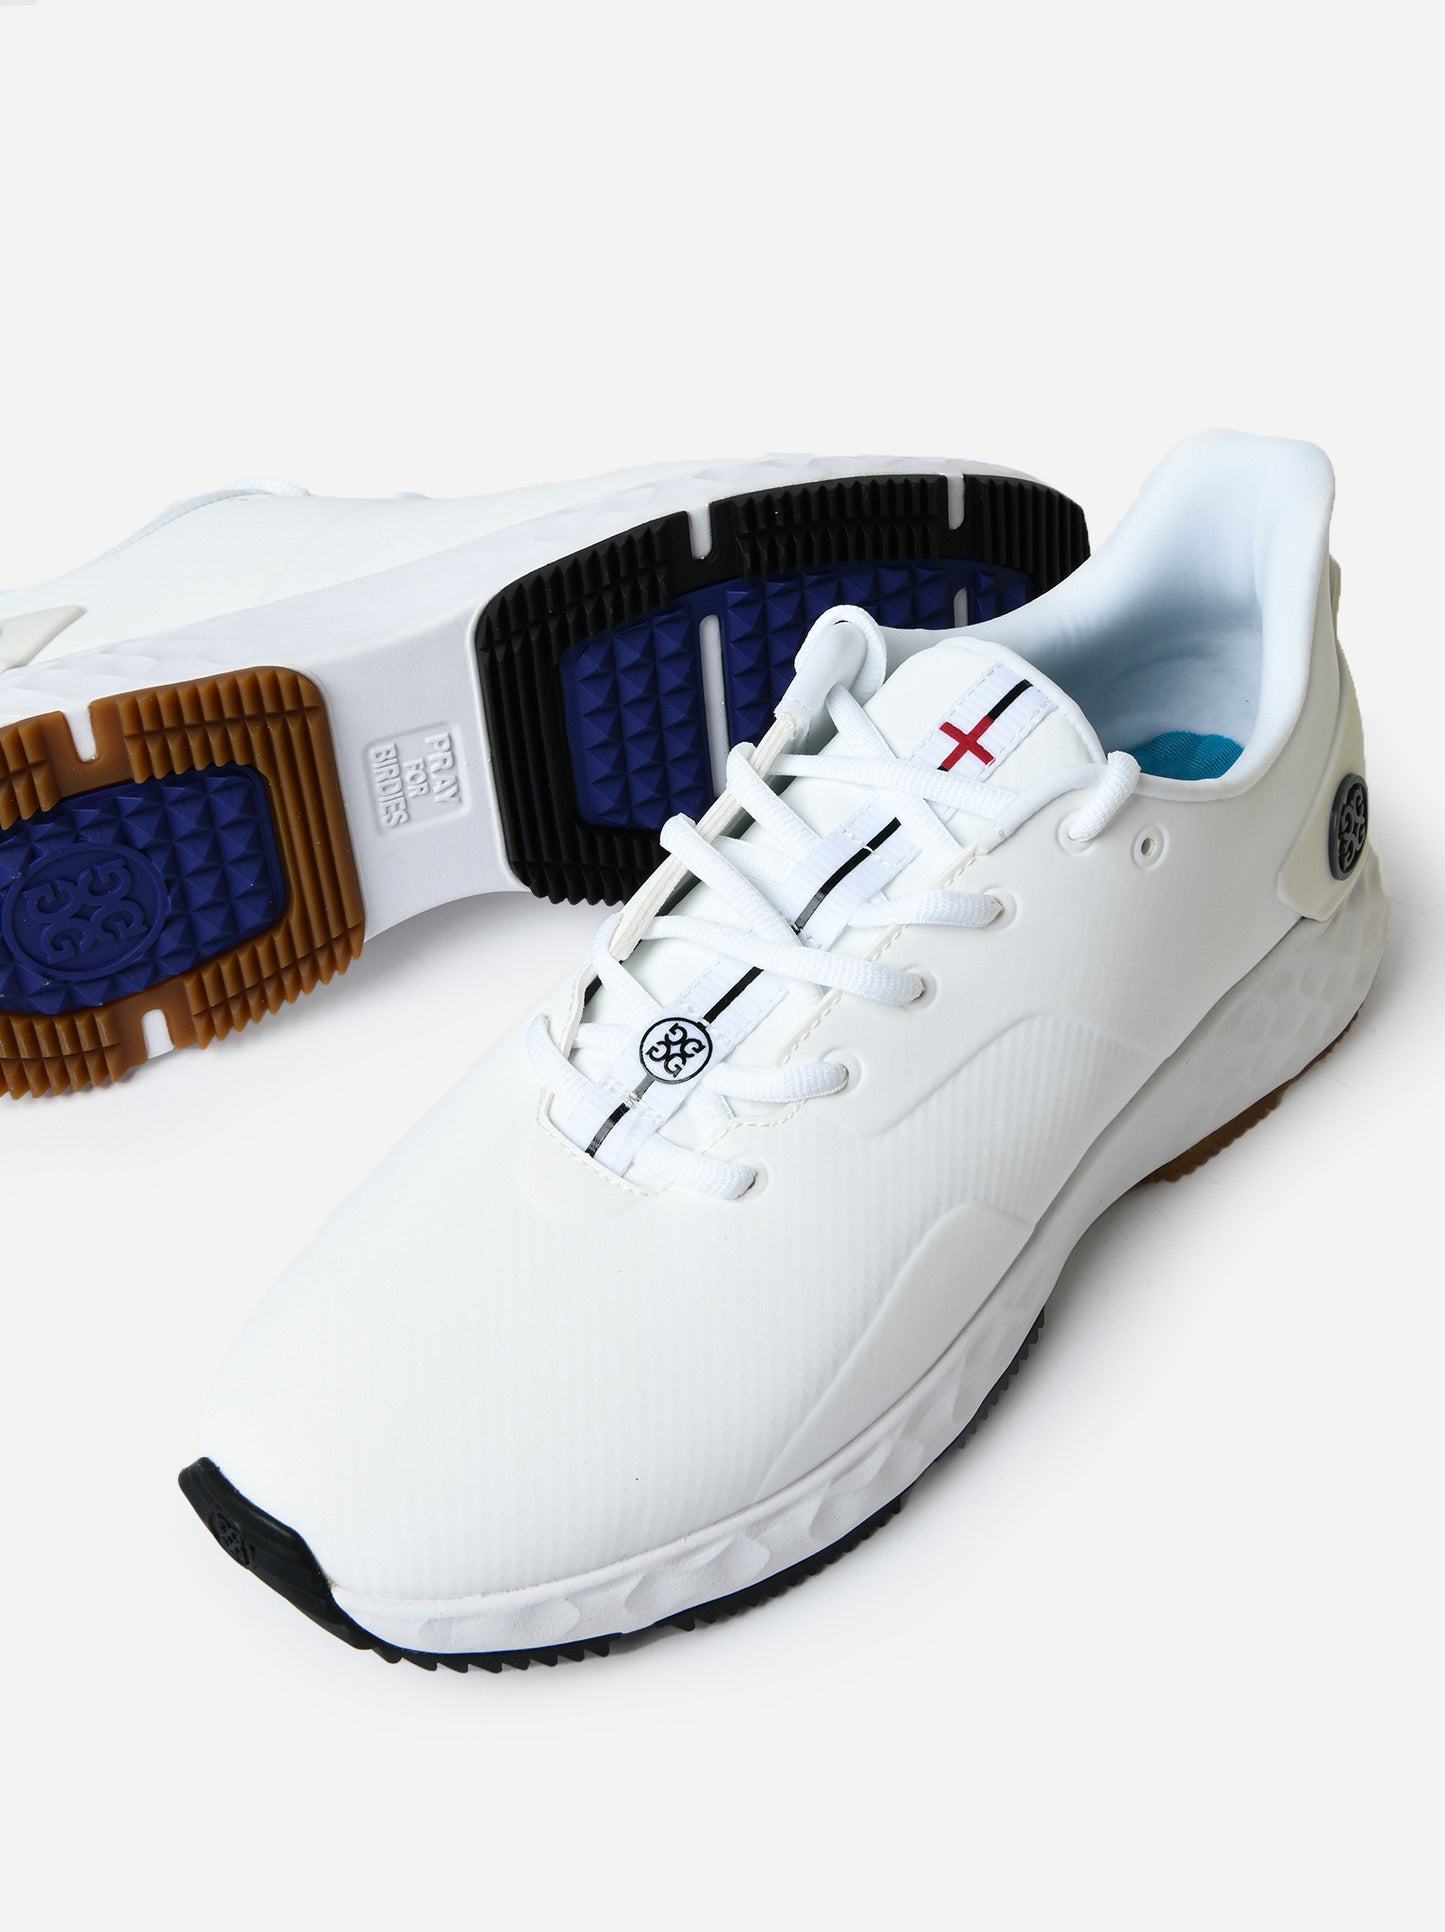 G/Fore Men's MG4+ Golf Shoe